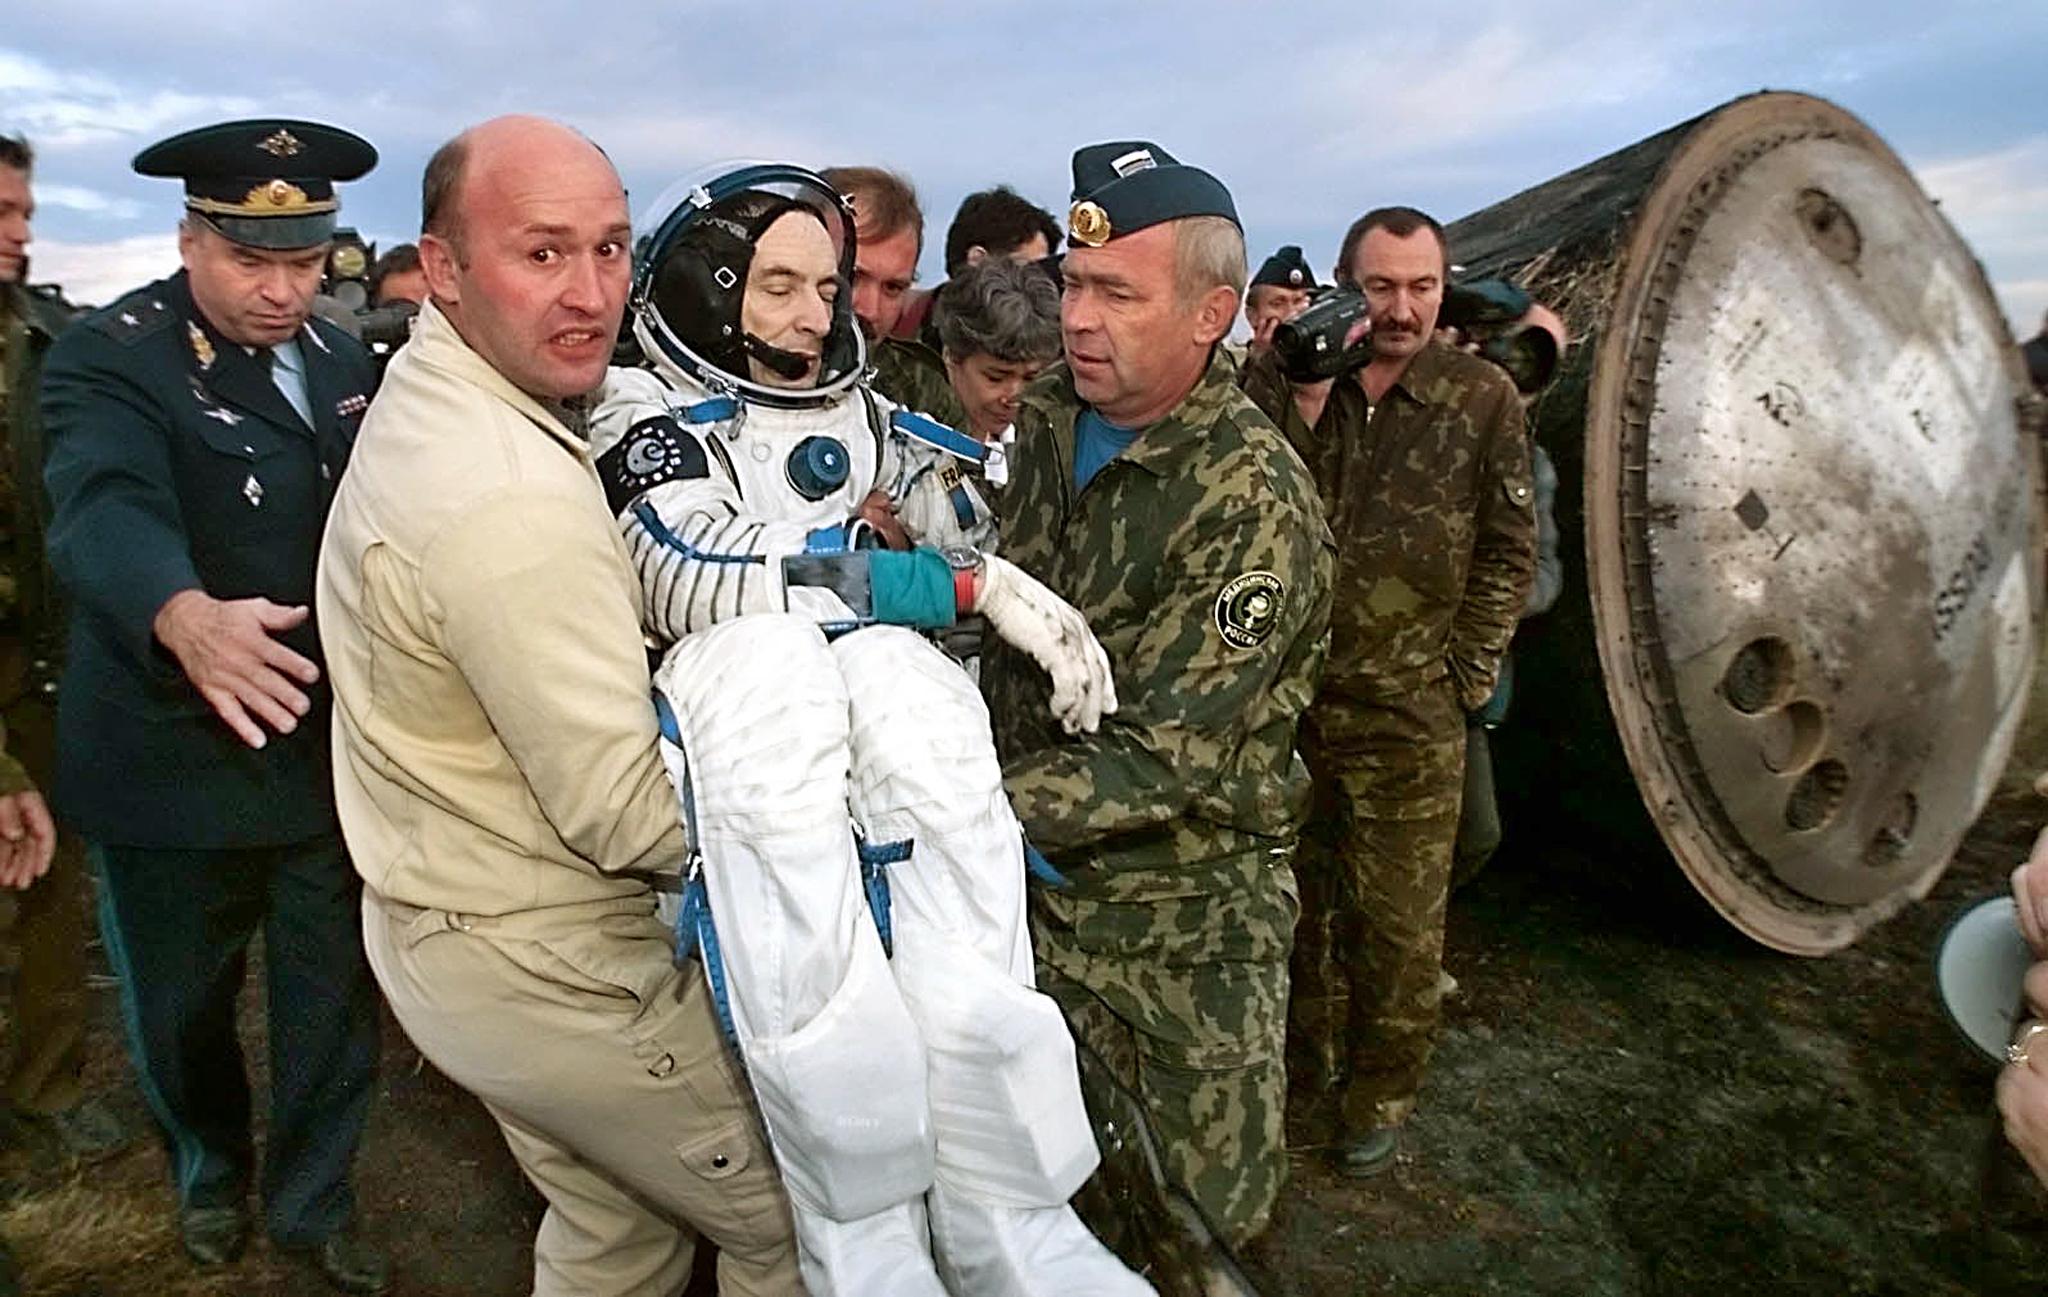 Russian rescue officers carry French astronaut Jean-Pierre Haignere out of "Souyz TM- 29" space craft Aug. 28, 1999, near Arkalyk in Kazakhstan, where the international space crew had landed. Viktor Afanasiev, Jean-Pierre Haignere and Sergei Avdeyev probably were the last crew on Russian Mir space station, Russian officers said.